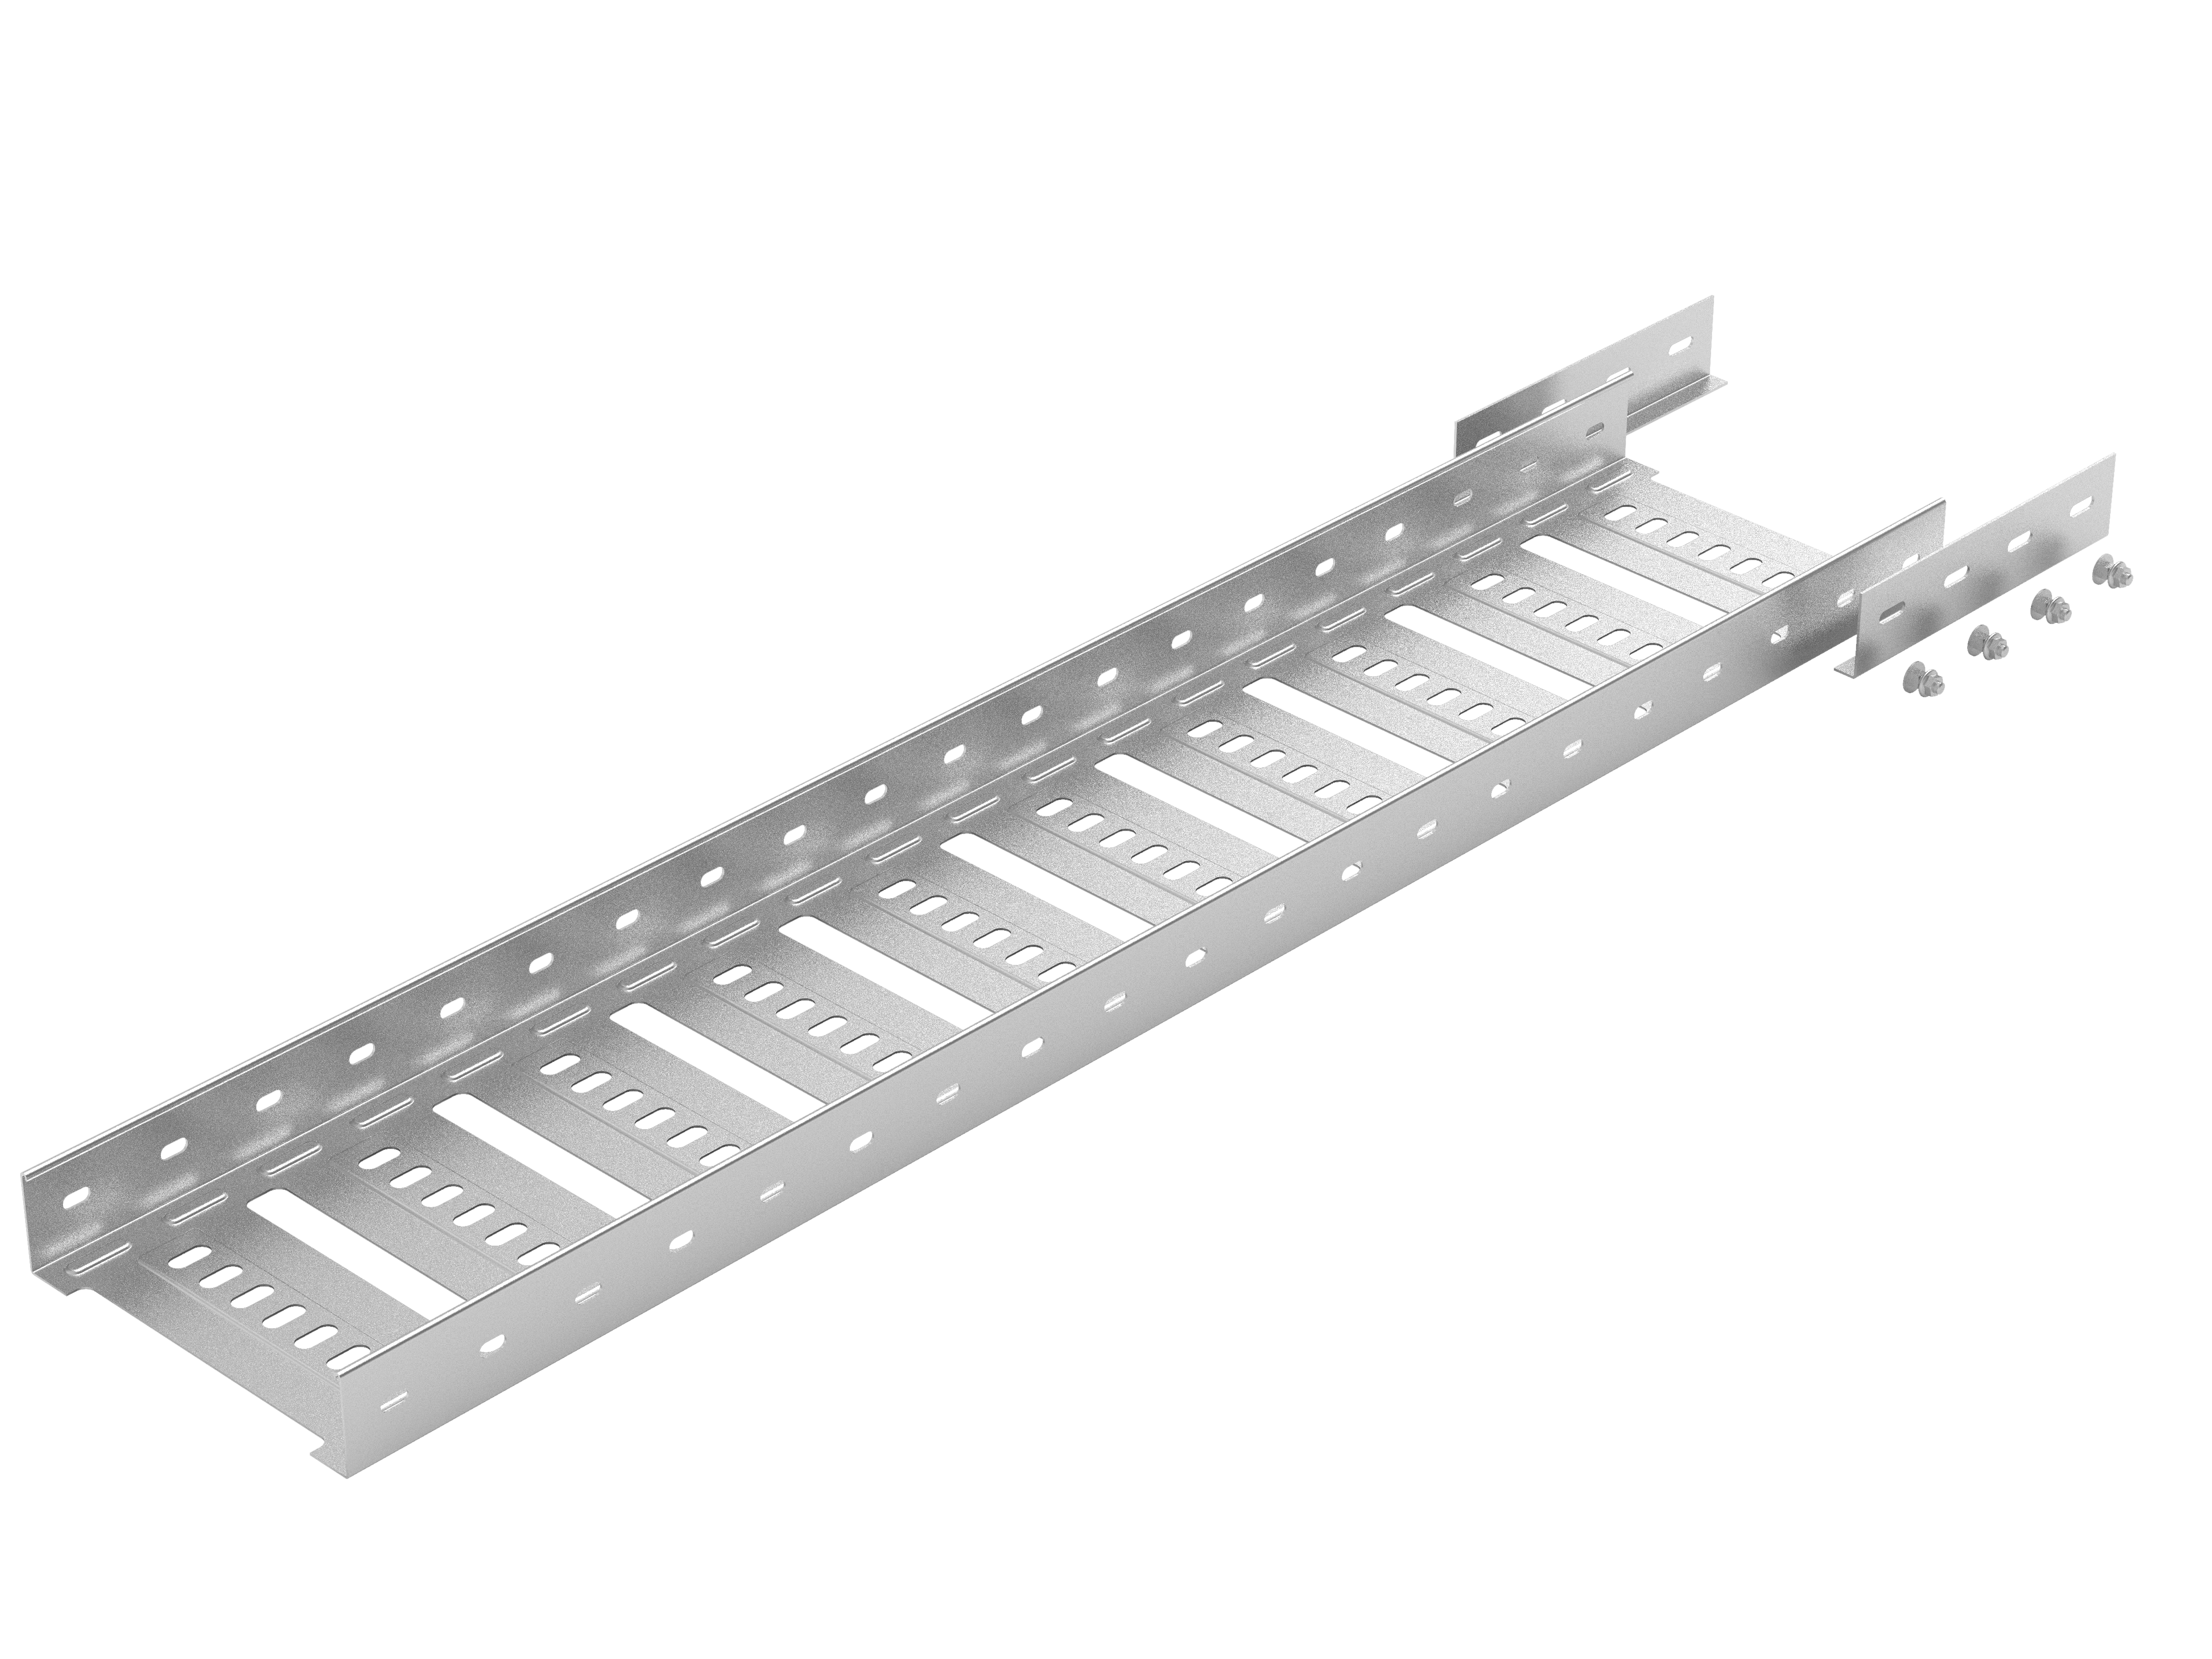 Cable tray